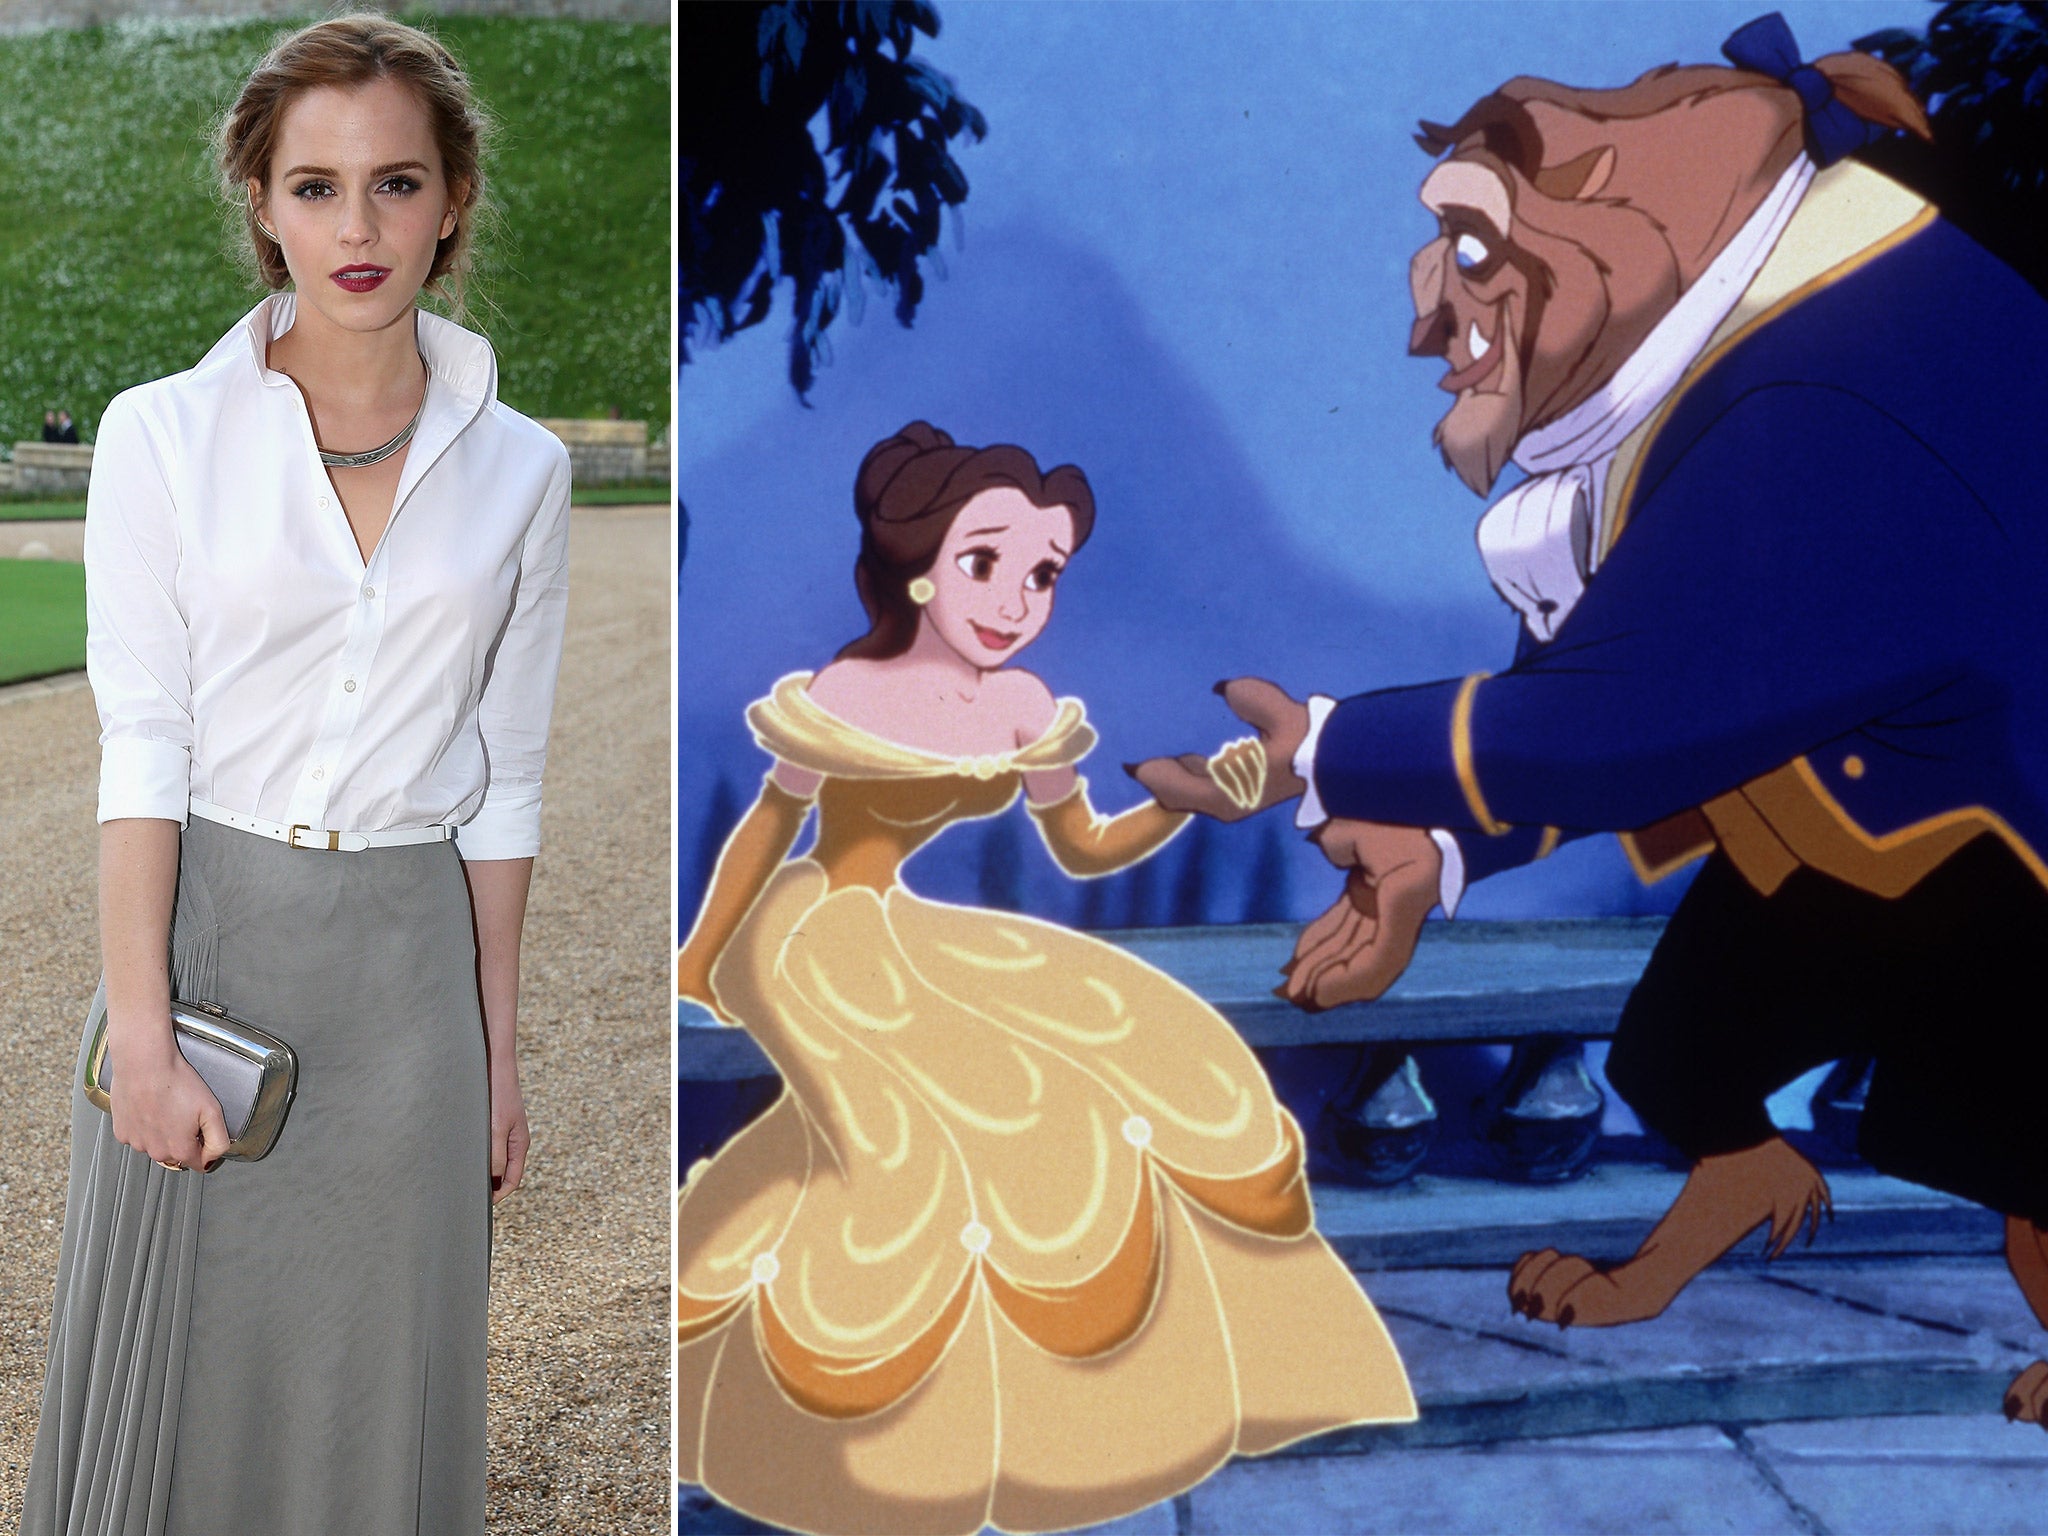 Emma Watson has been lined up for Warner Bros' remake of Disney's Beauty and the Beast